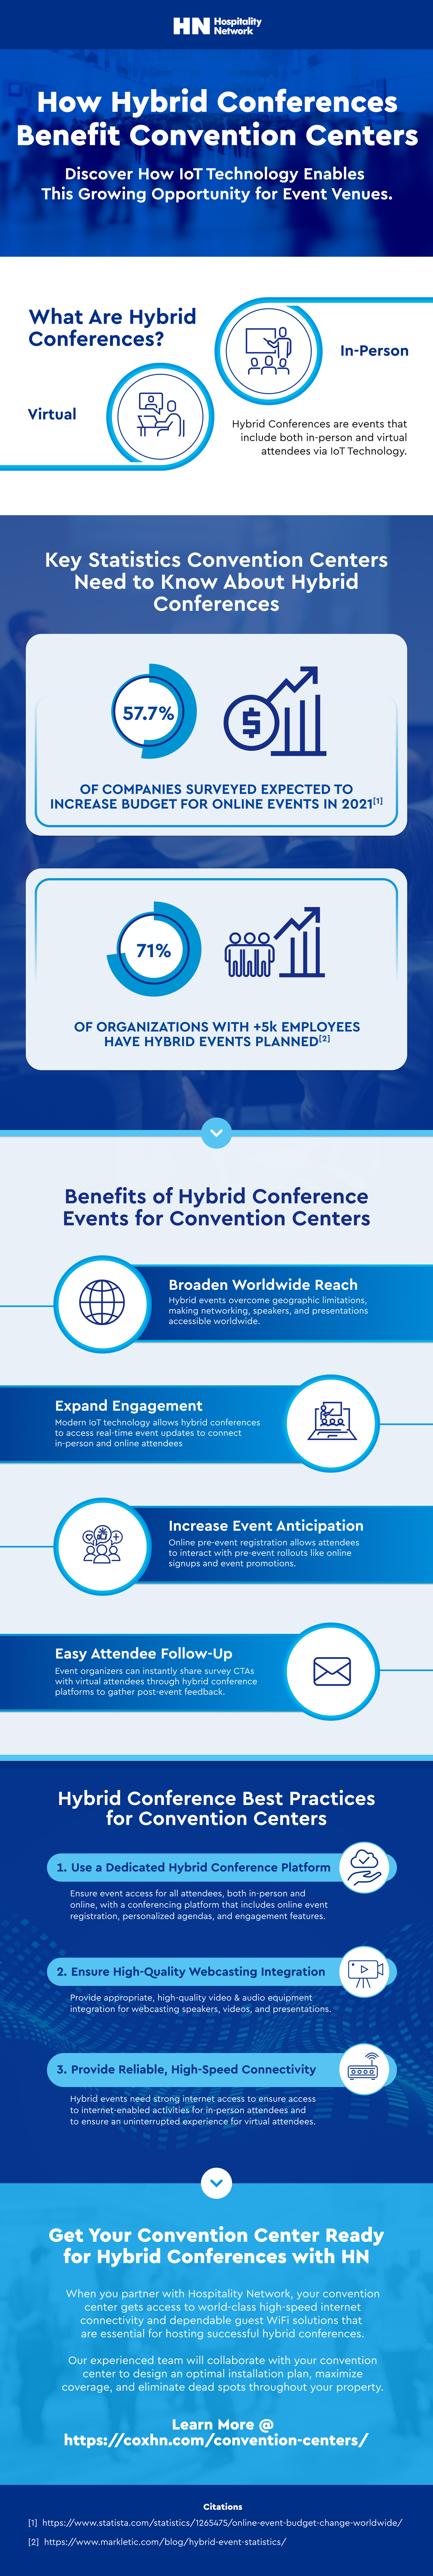 Hybrid Conference Benefits Convention Centers Infographic